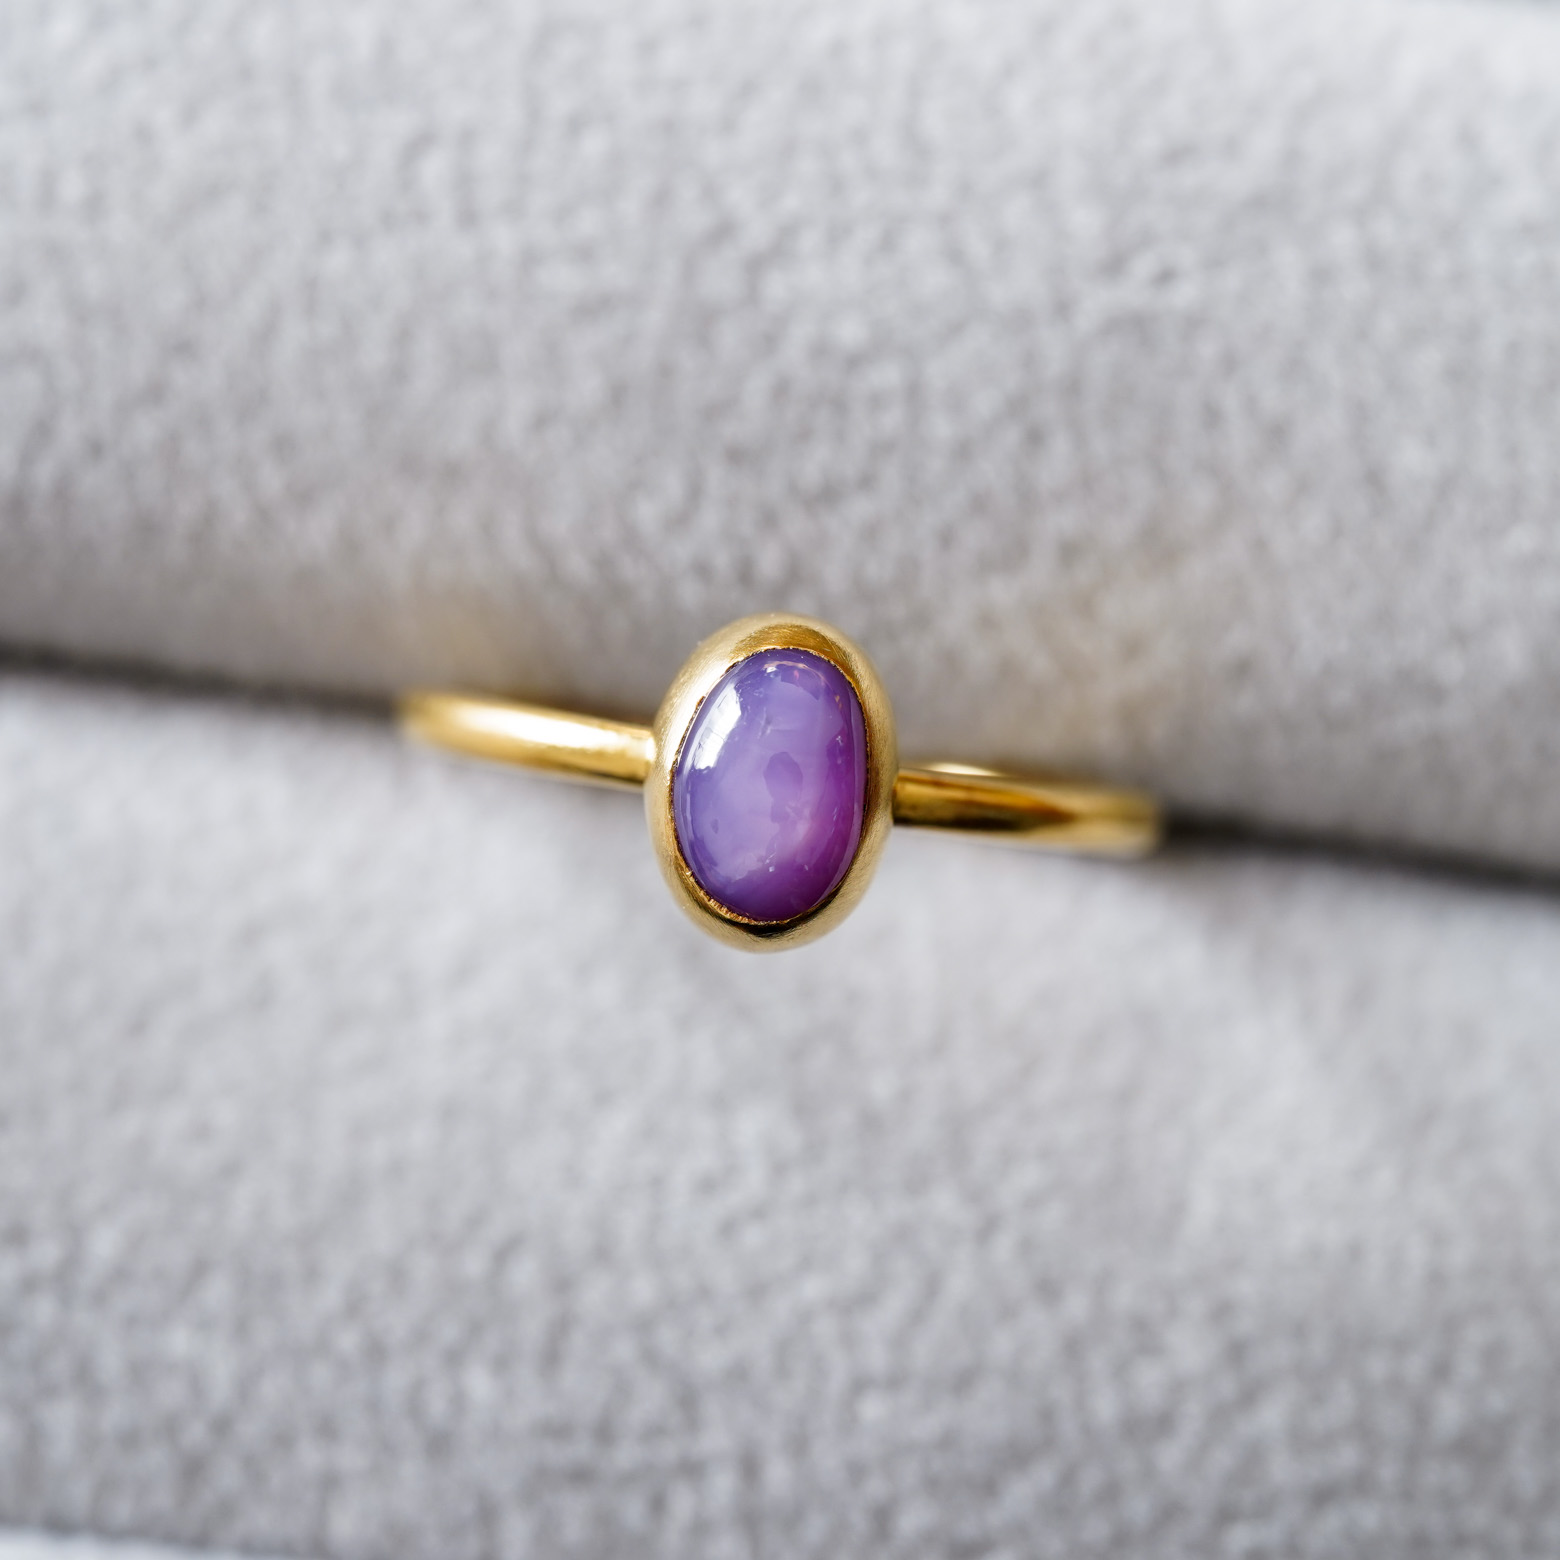 Star Sapphire Ring (SOURCE) - SOURCE objects